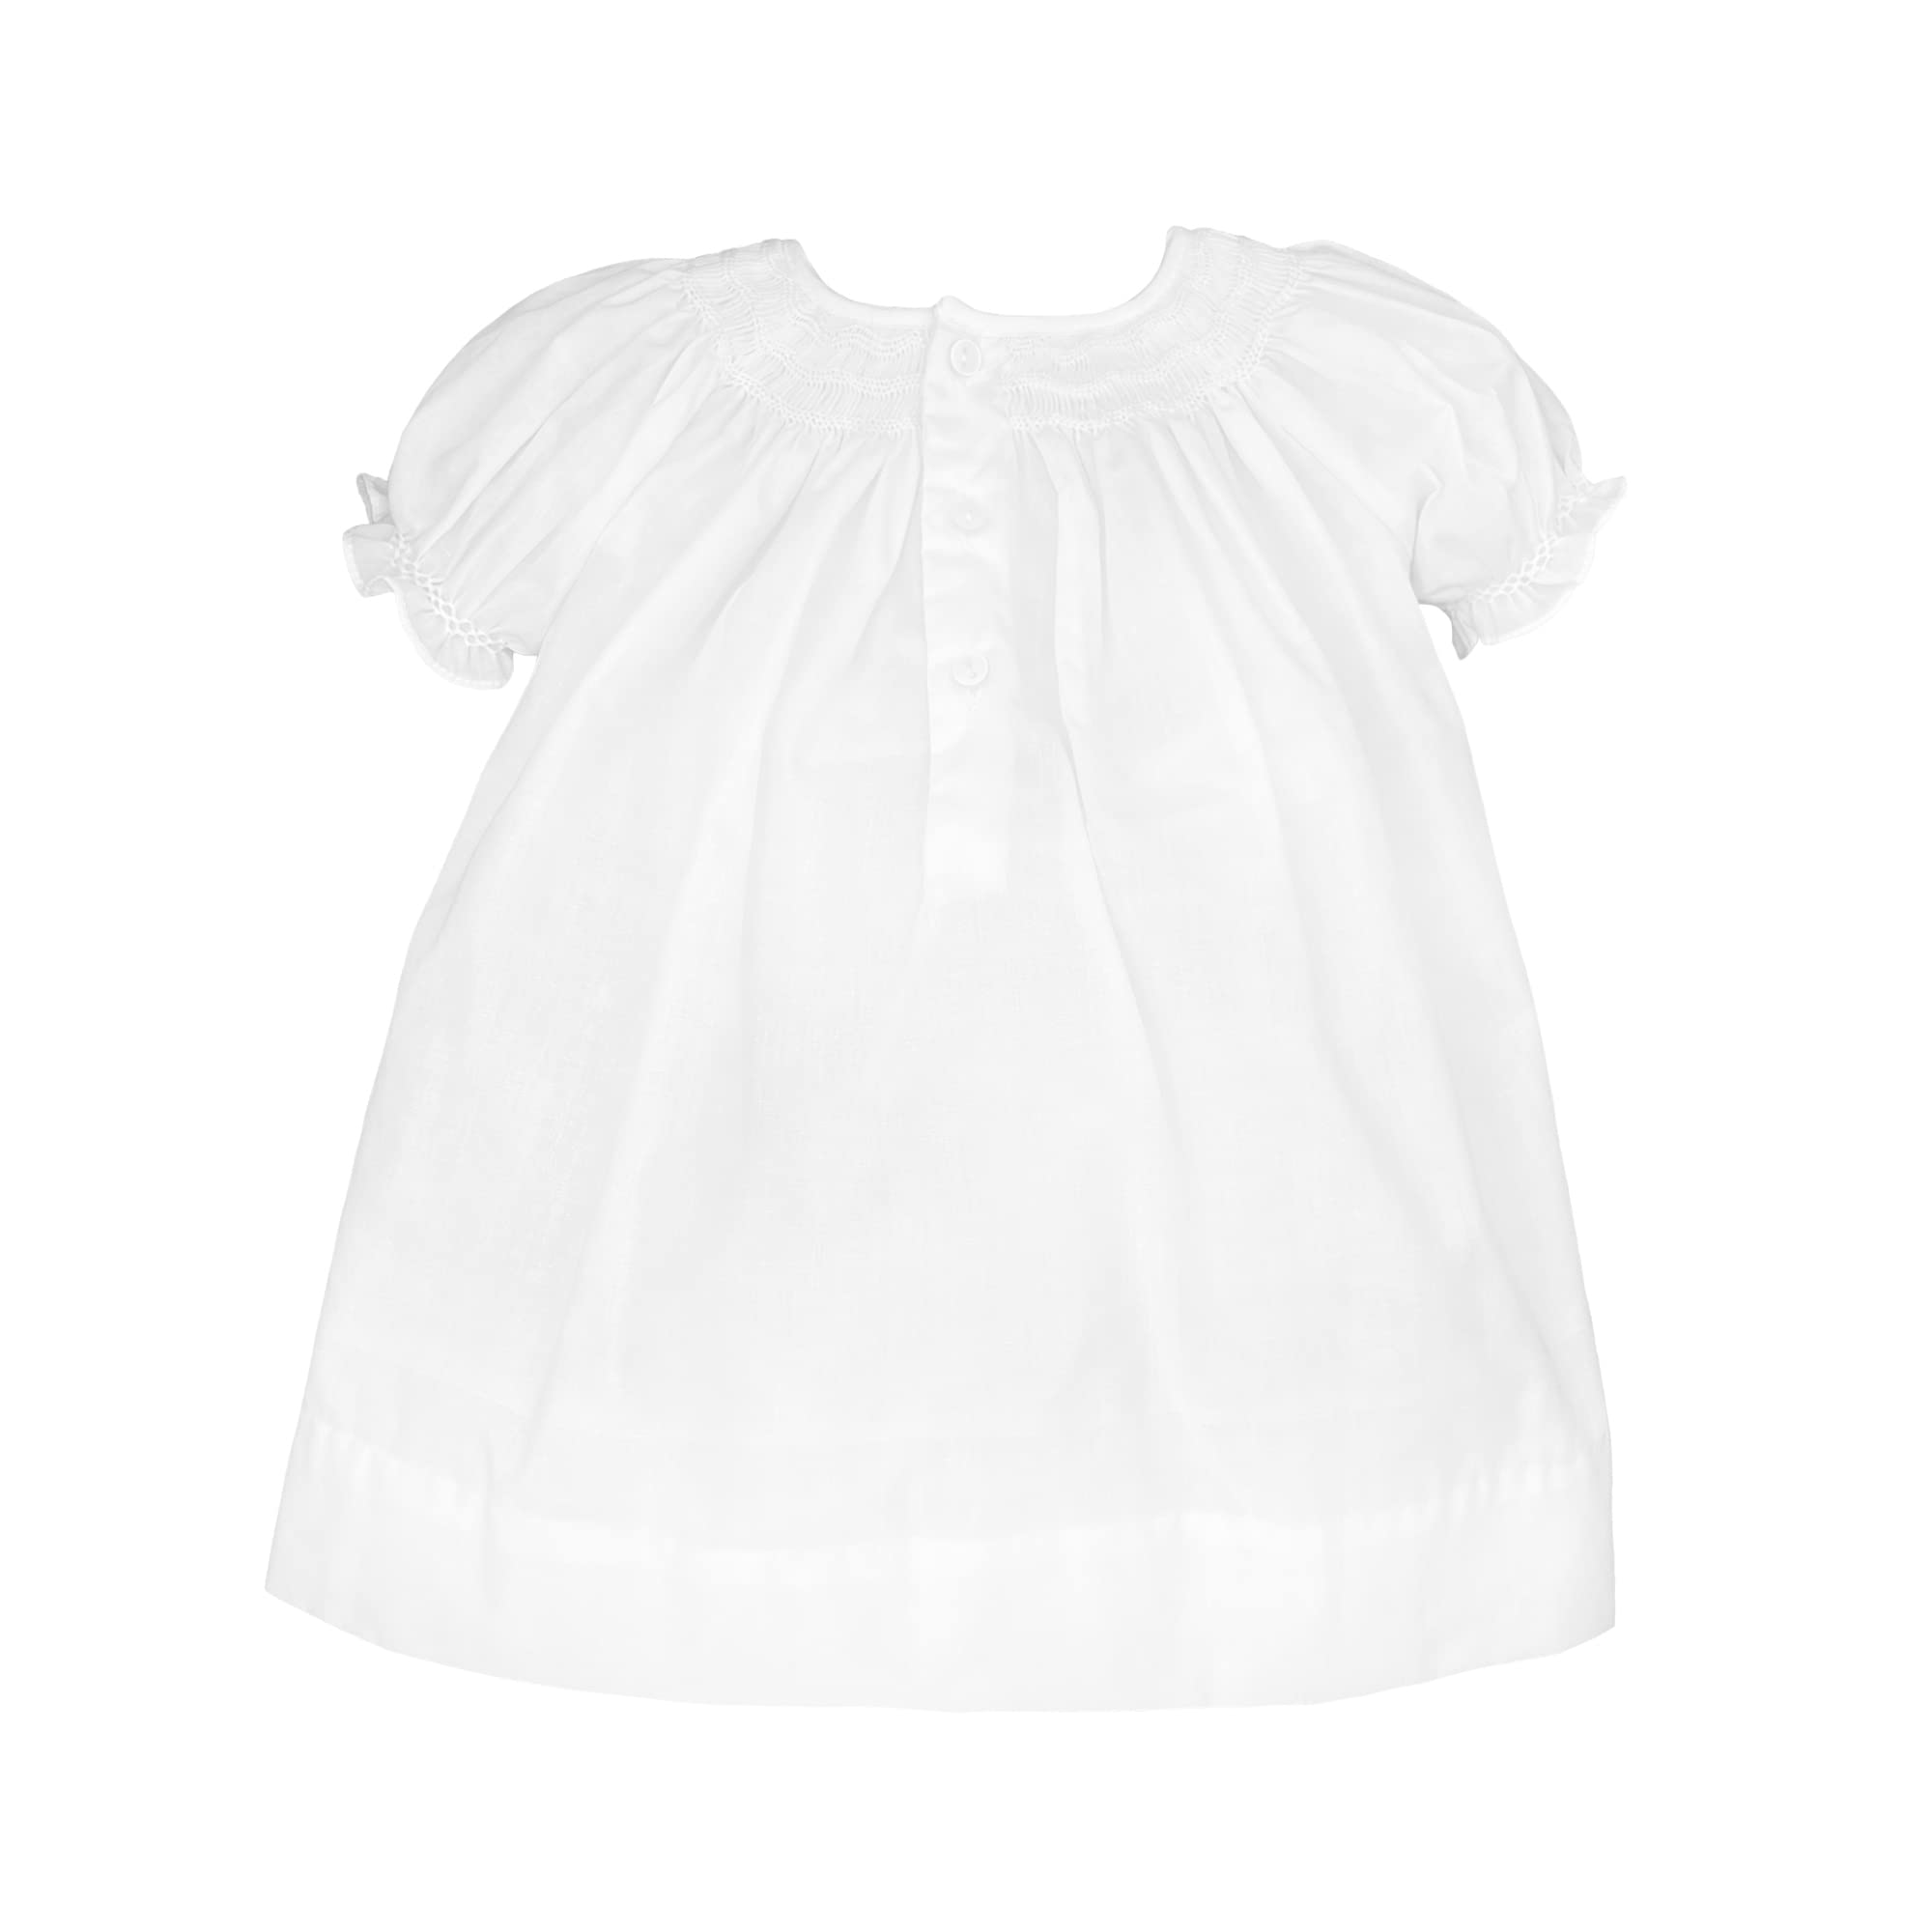 Petit Ami Baby Girls' Daygown with Wave Smocking, White